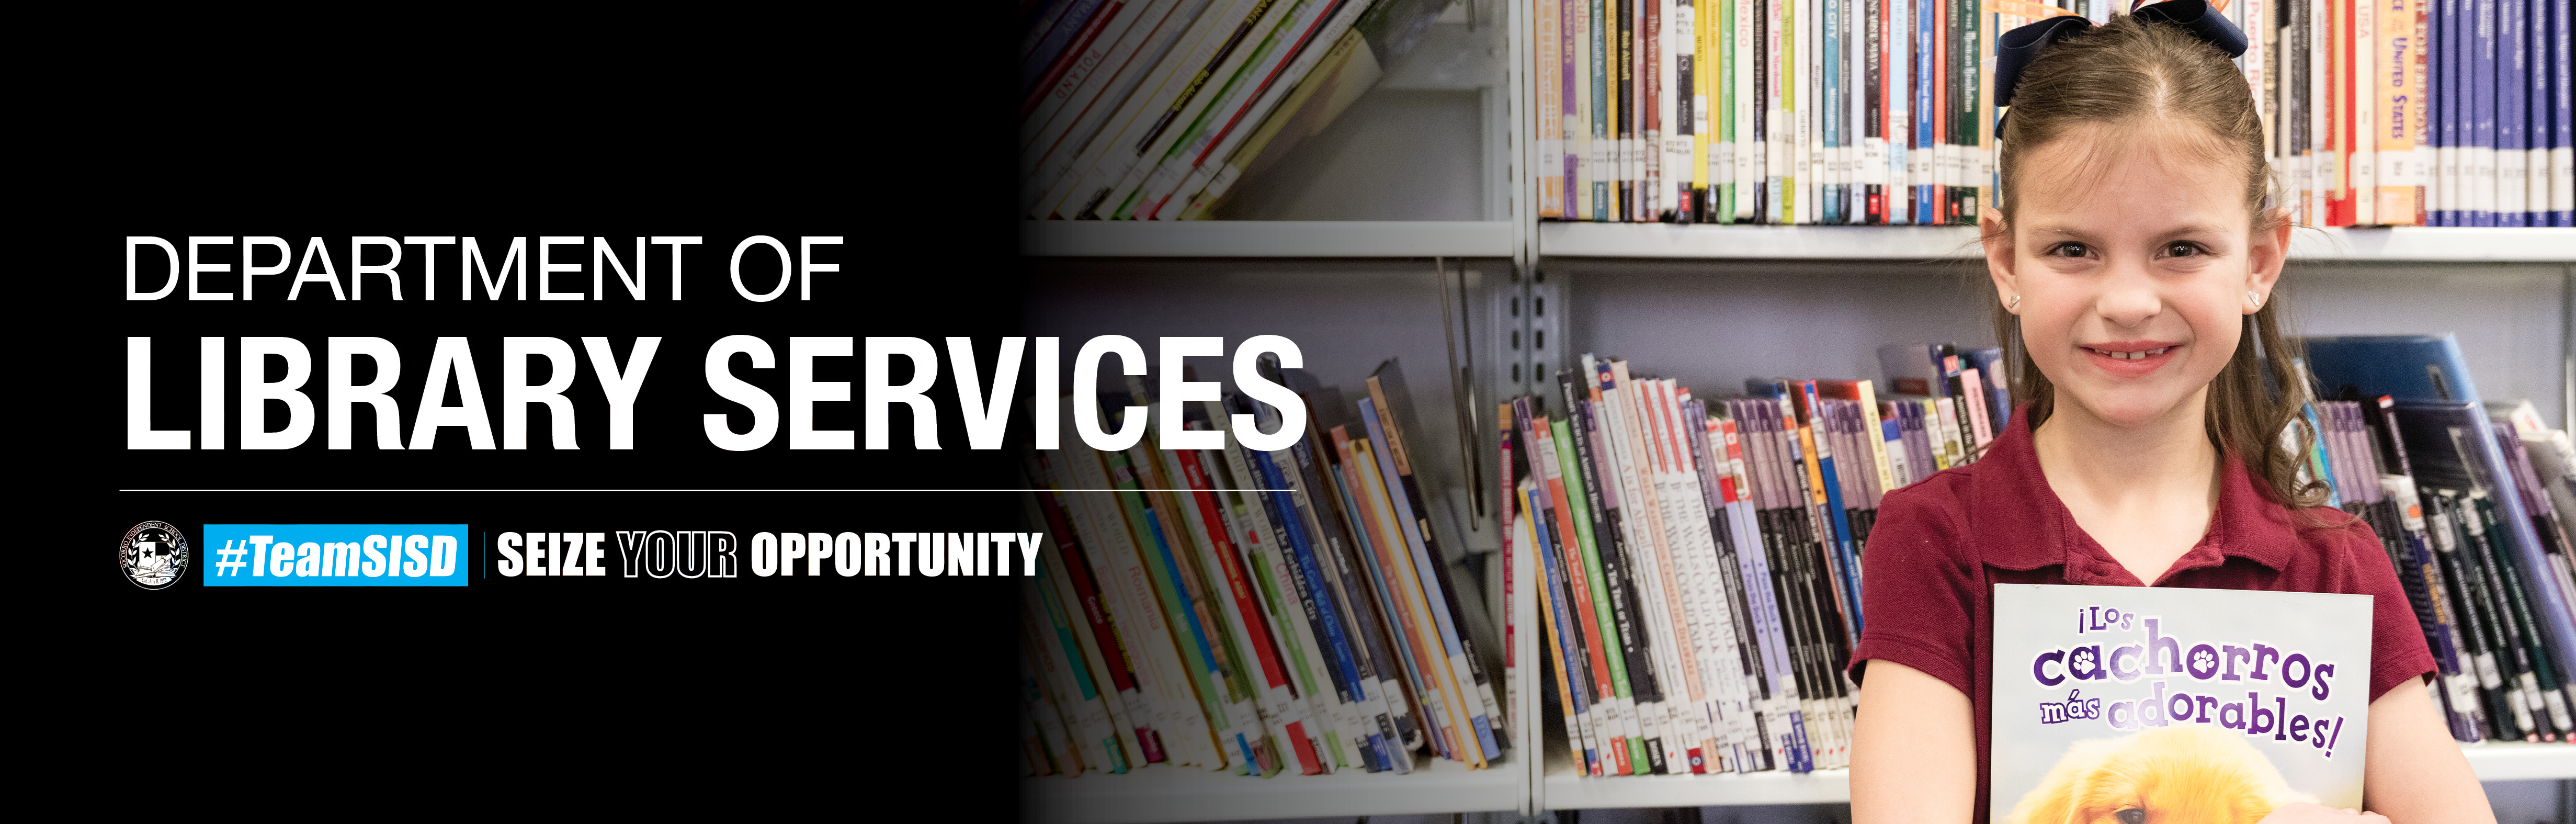 Department of Library Services web header graphic